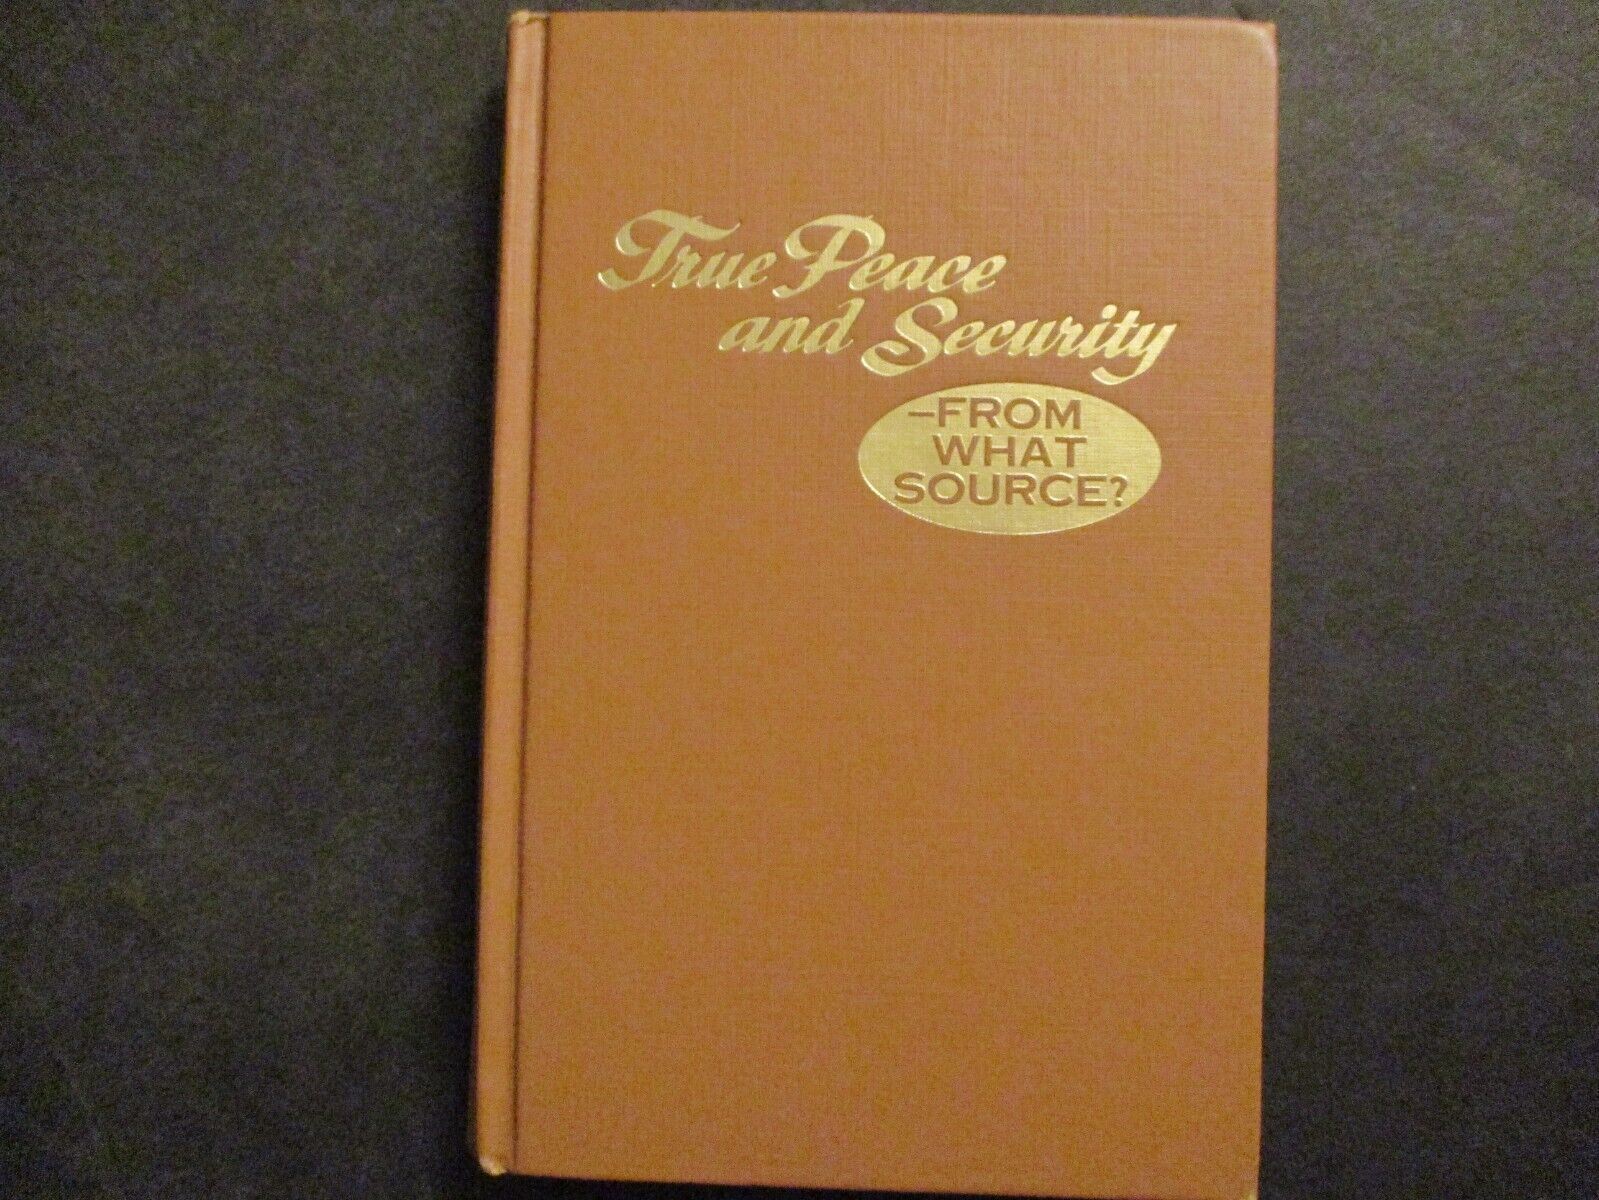 1973 True Peace and Security-From What Source? Christian book